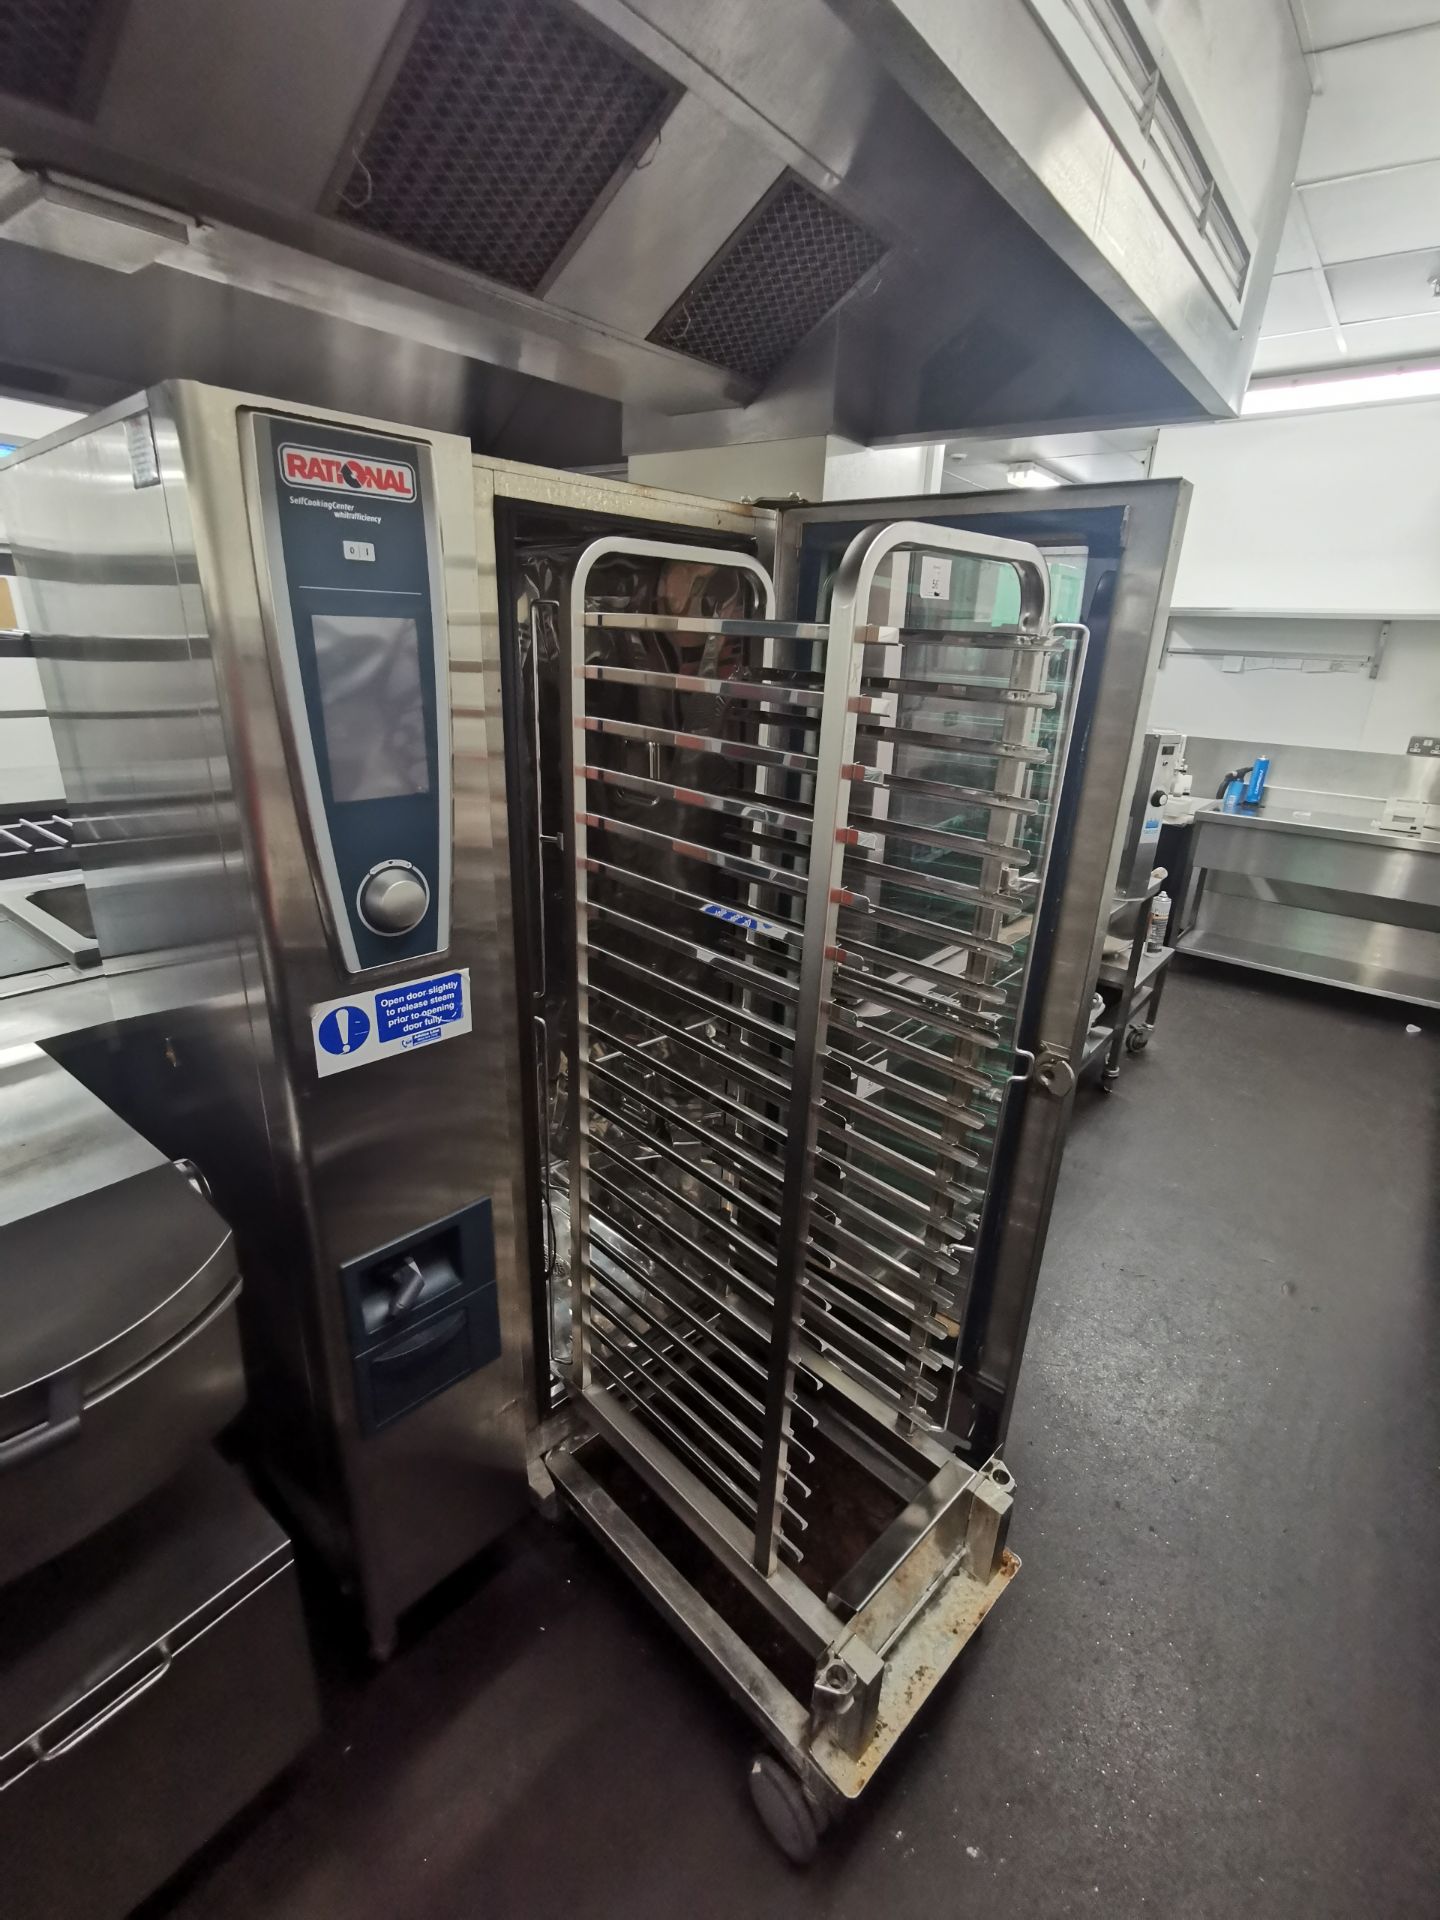 Rational Scc 201 self cooking centre White Efficiency - Image 6 of 7